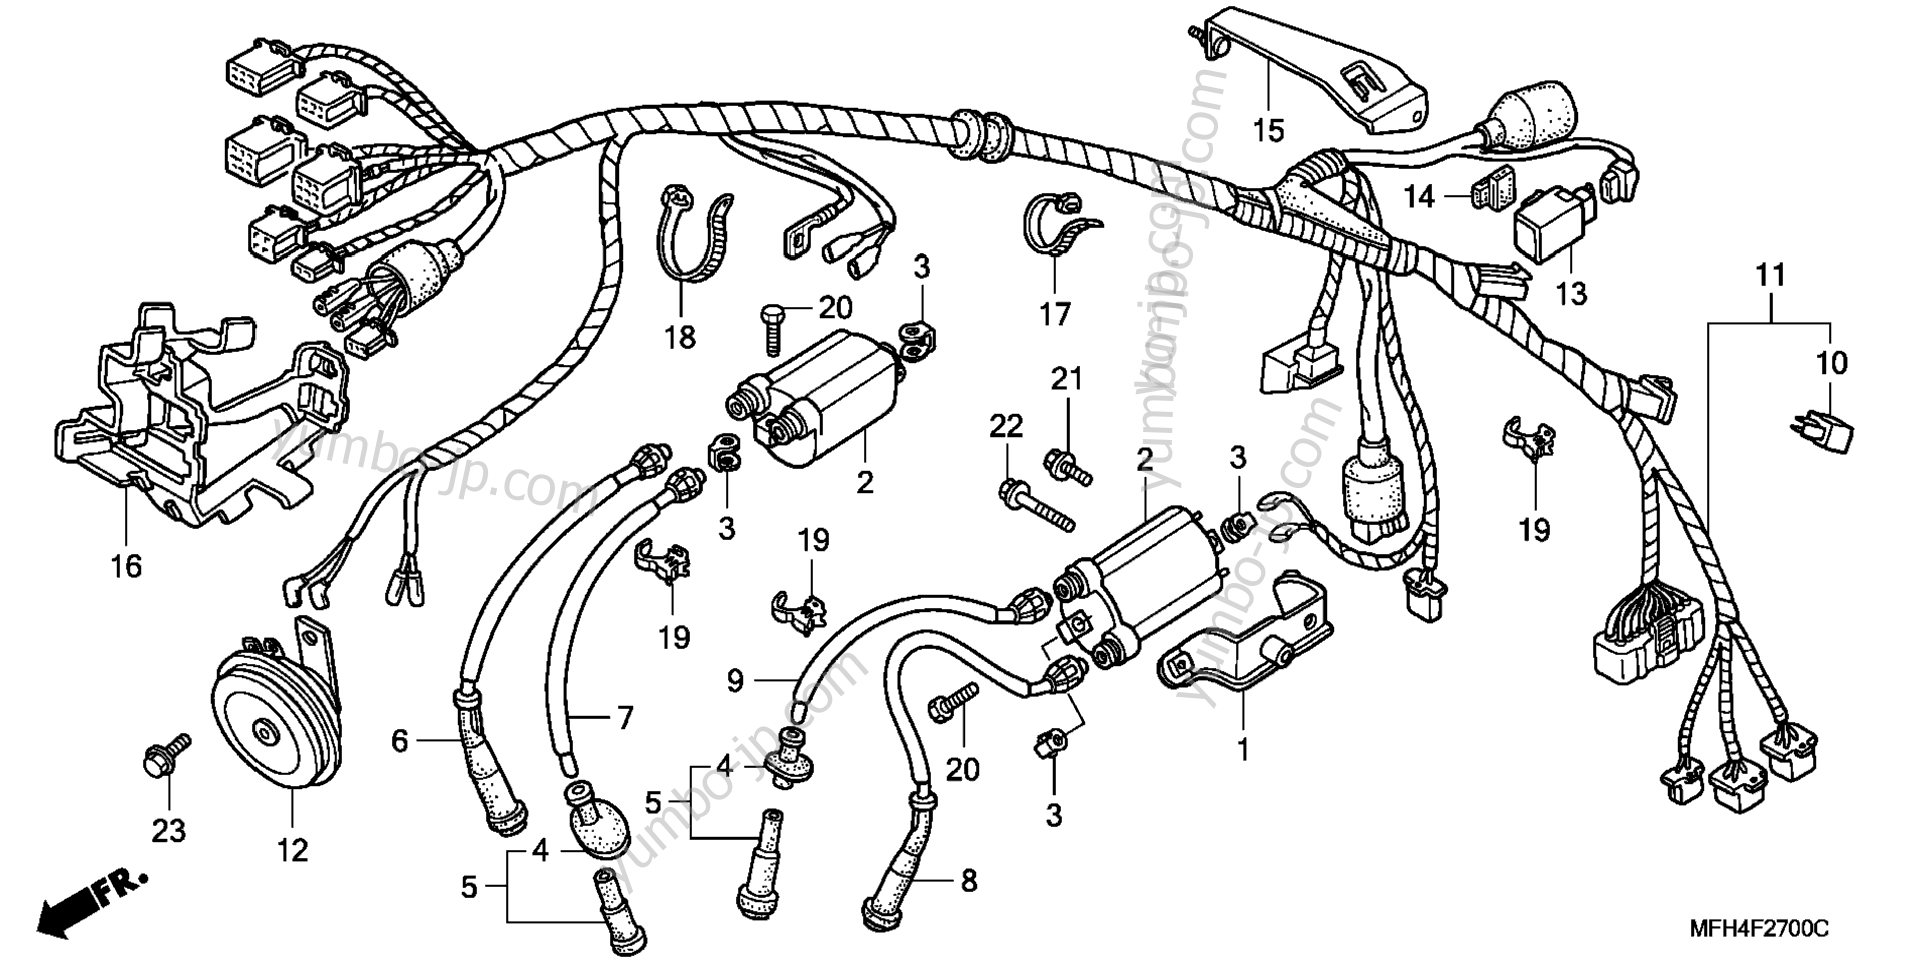 WIRE HARNESS for motorcycles HONDA VT600CD AC/A 2006 year